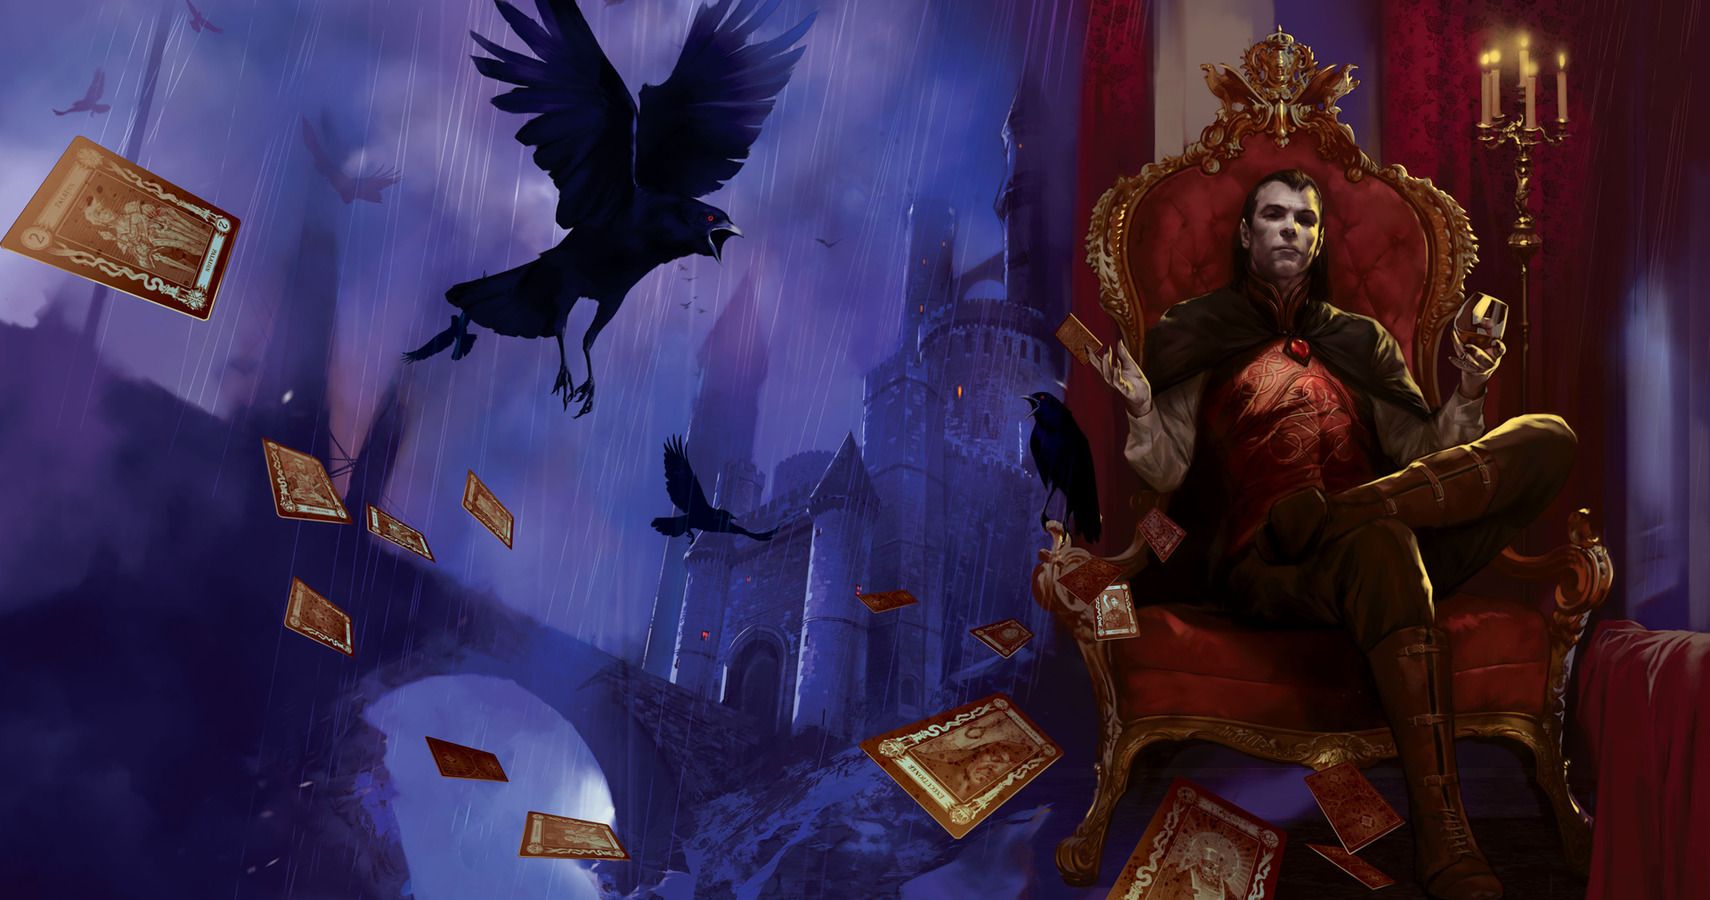 Strahd sitting upon a throne, with a raven flying nearby.